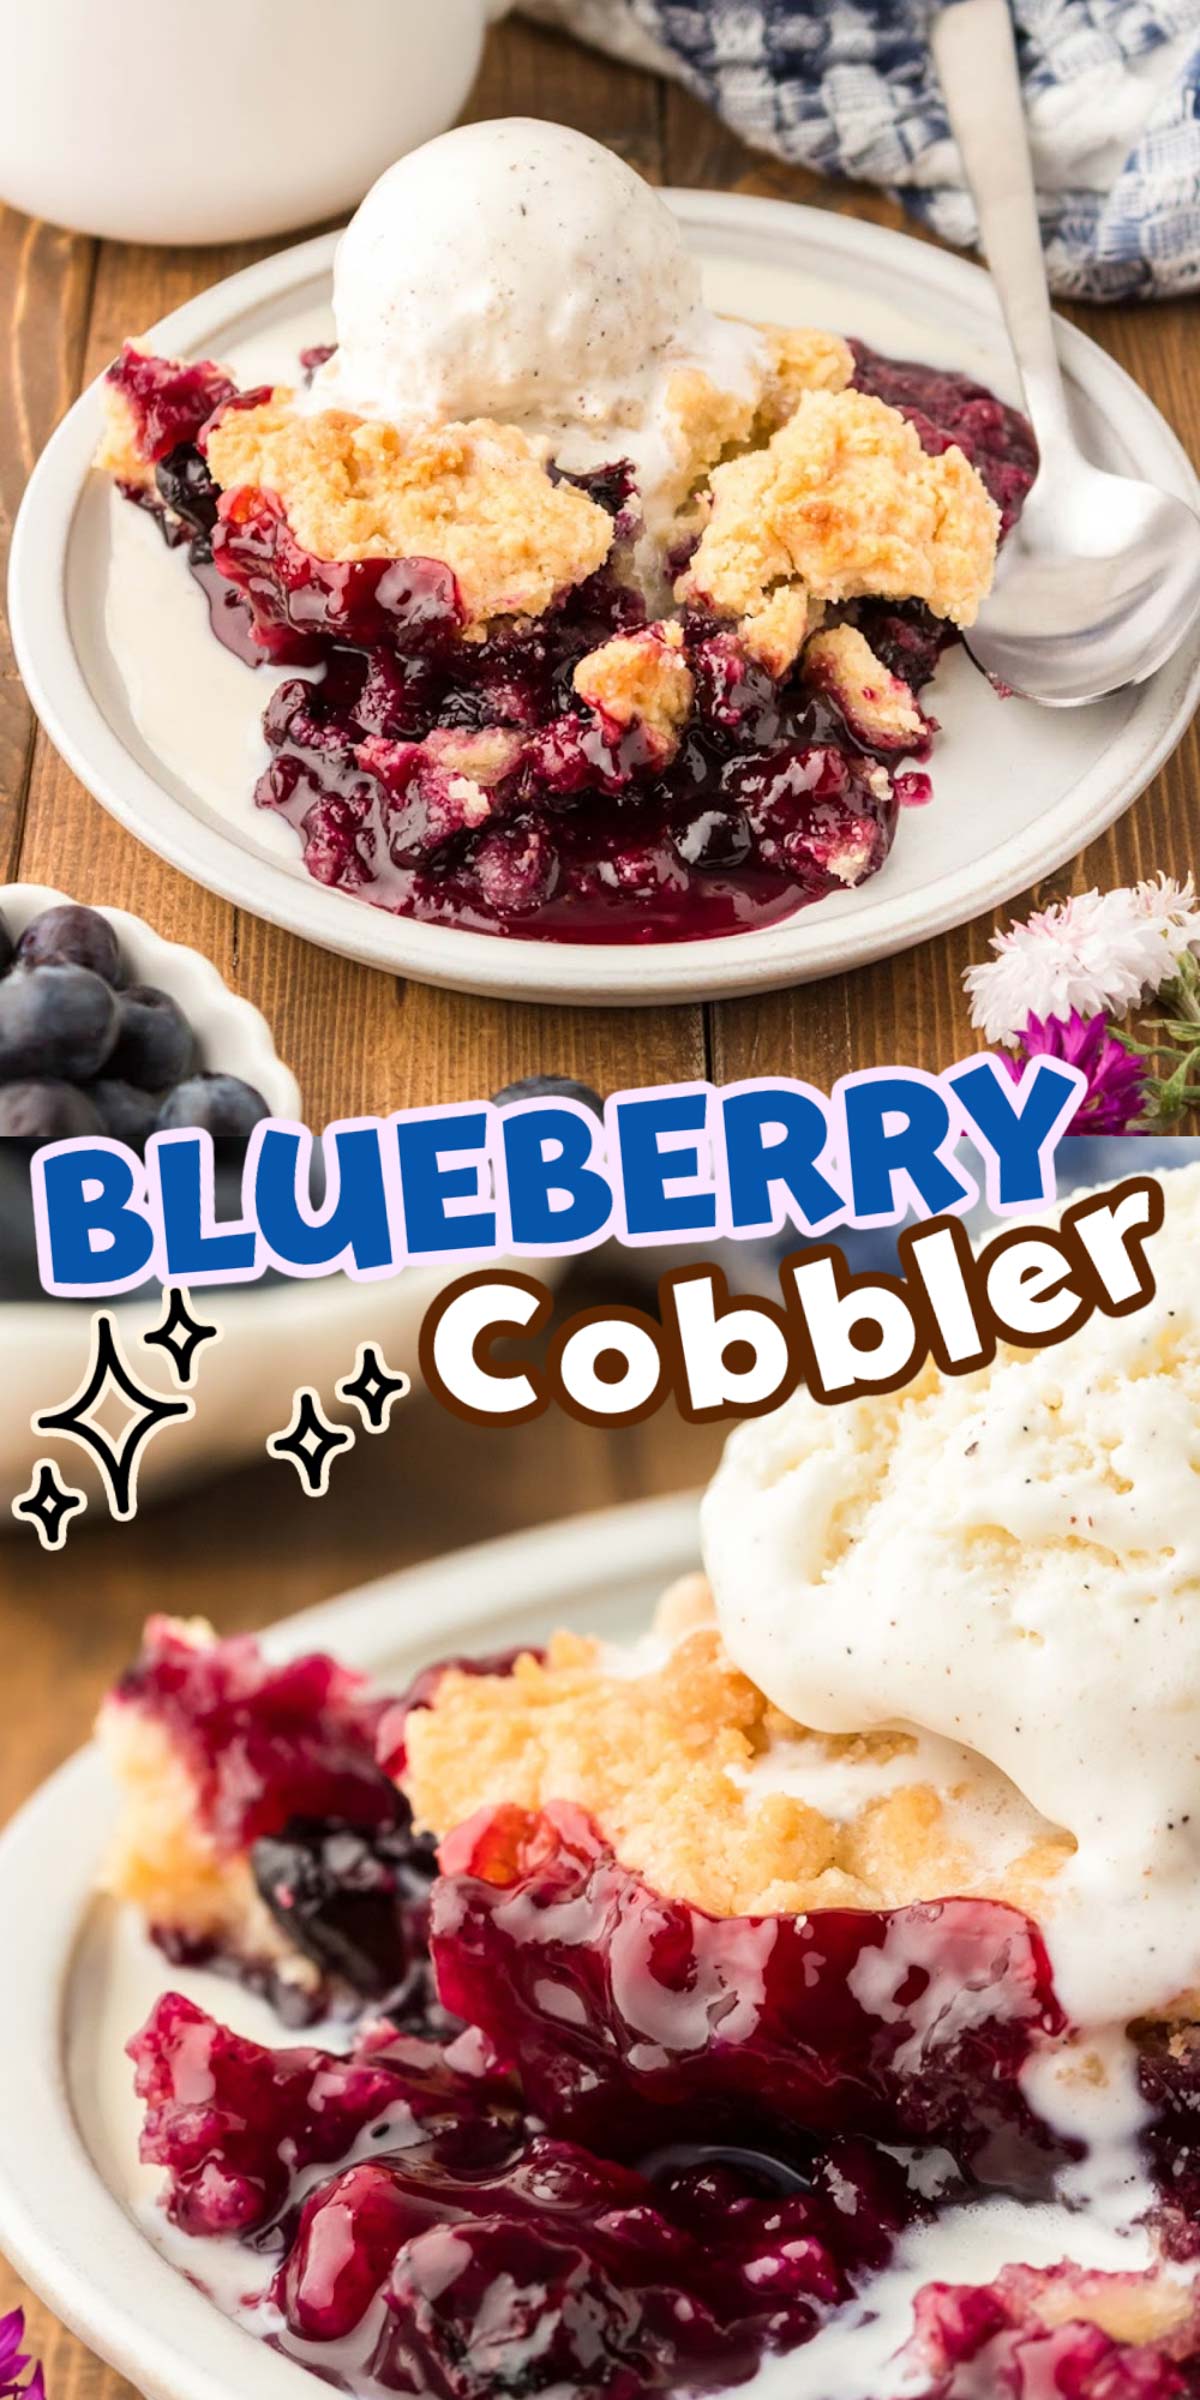 Blueberry Cobbler is a delicious seasonal baked dessert with a juicy blueberry filling and a sweet golden-brown topping that's a cross between a biscuit and a cake! It's pure summer comfort food, and it's absolutely amazing served warm with a scoop of ice cream! via @sugarandsoulco